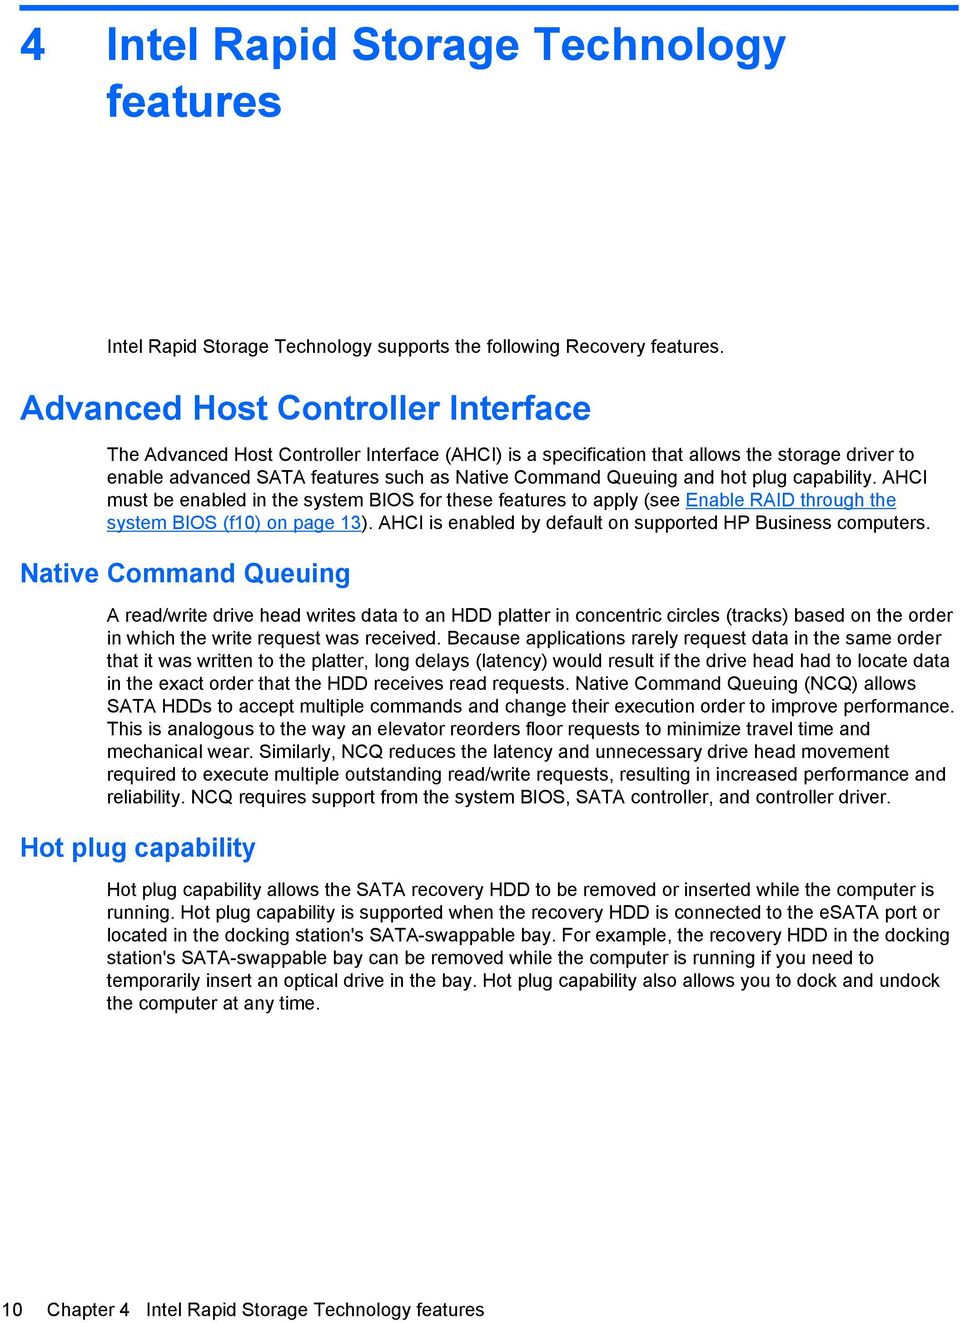 hot plug capability. AHCI must be enabled in the system BIOS for these features to apply (see Enable RAID through the system BIOS (f10) on page 13).